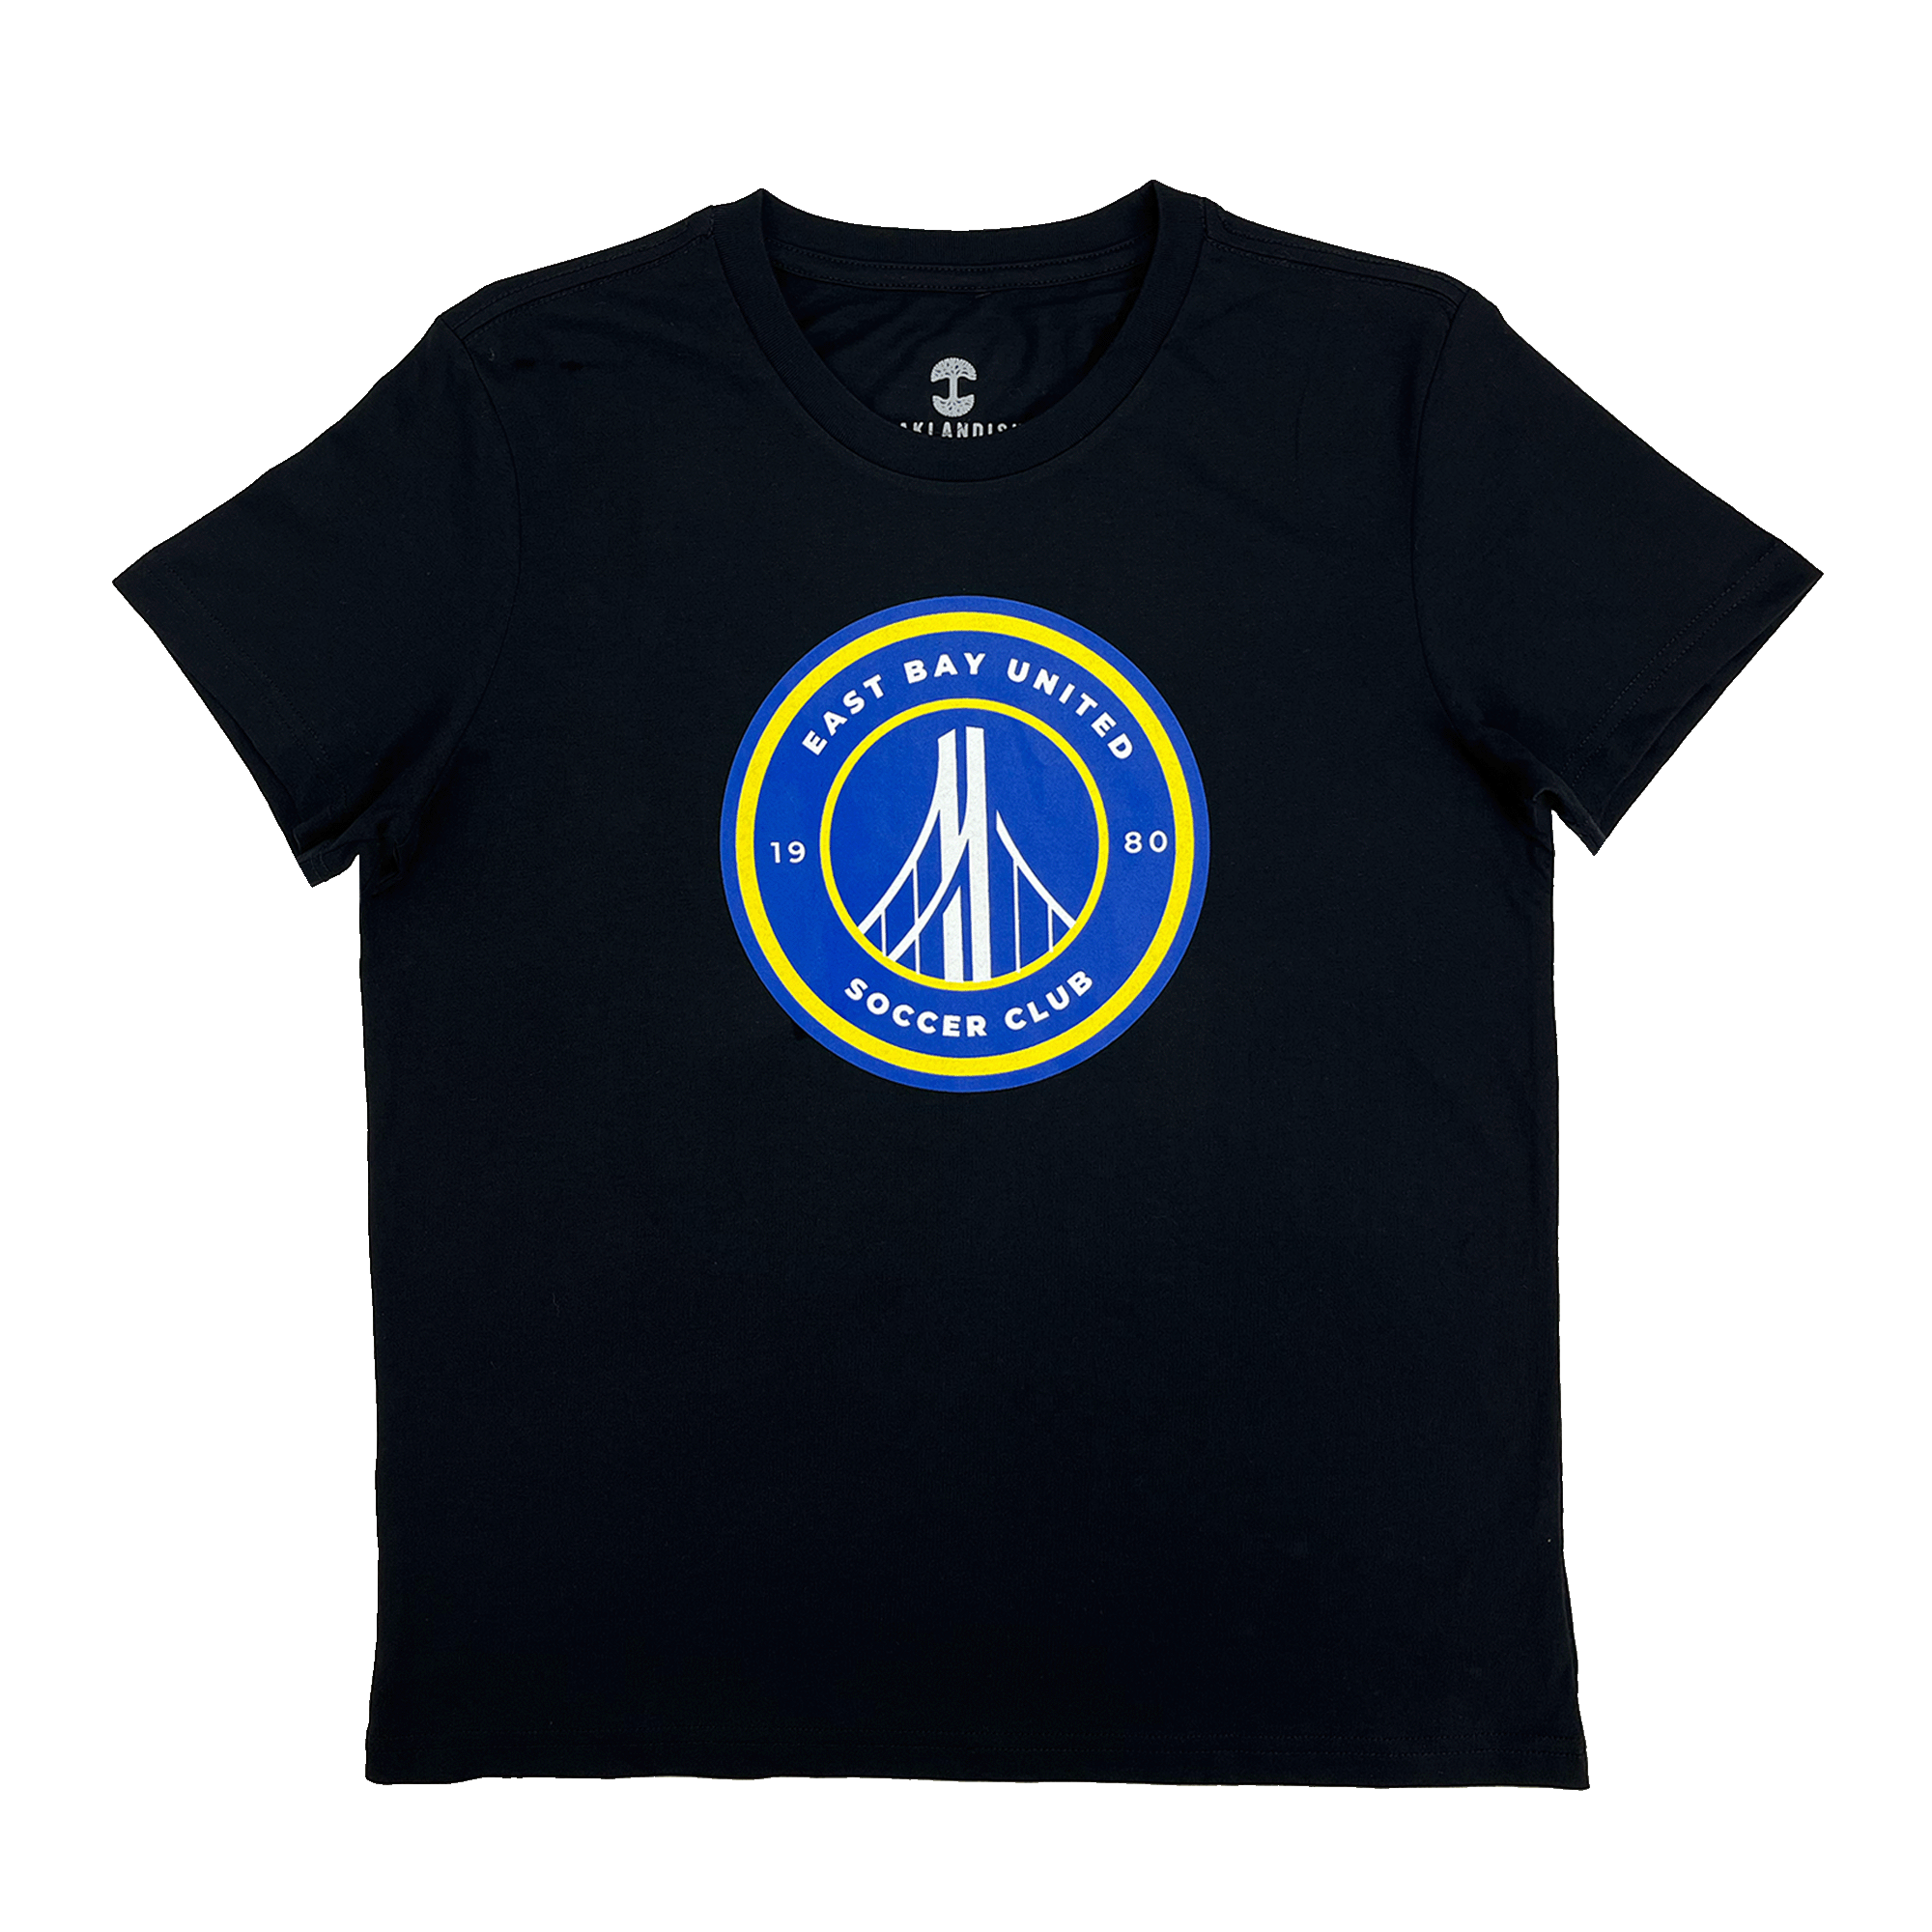 Front view of a black women’s t-shirt with round blue, white, and yellow East Bay United Soccer Club 1980 logo on the front chest.